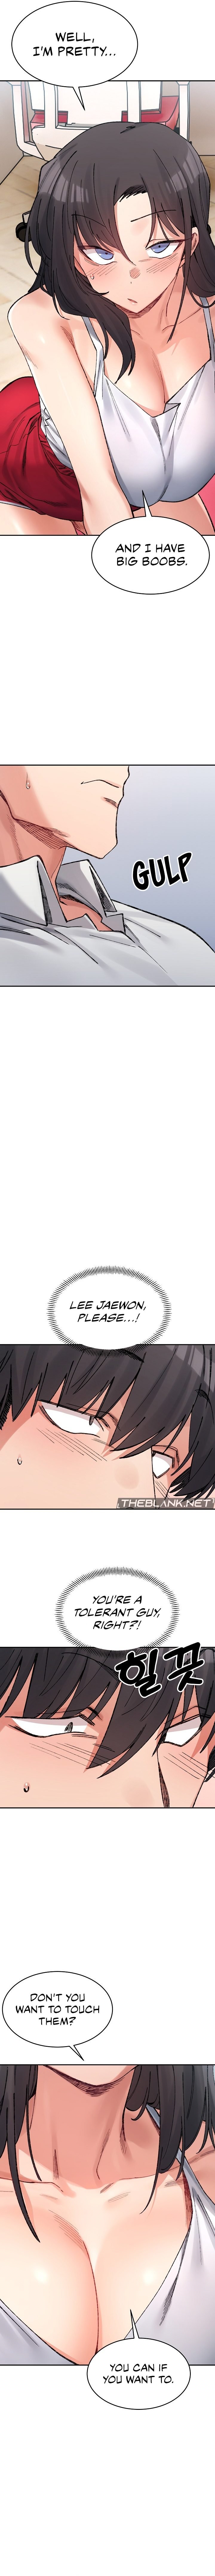 a-delicate-relationship-chap-36-6